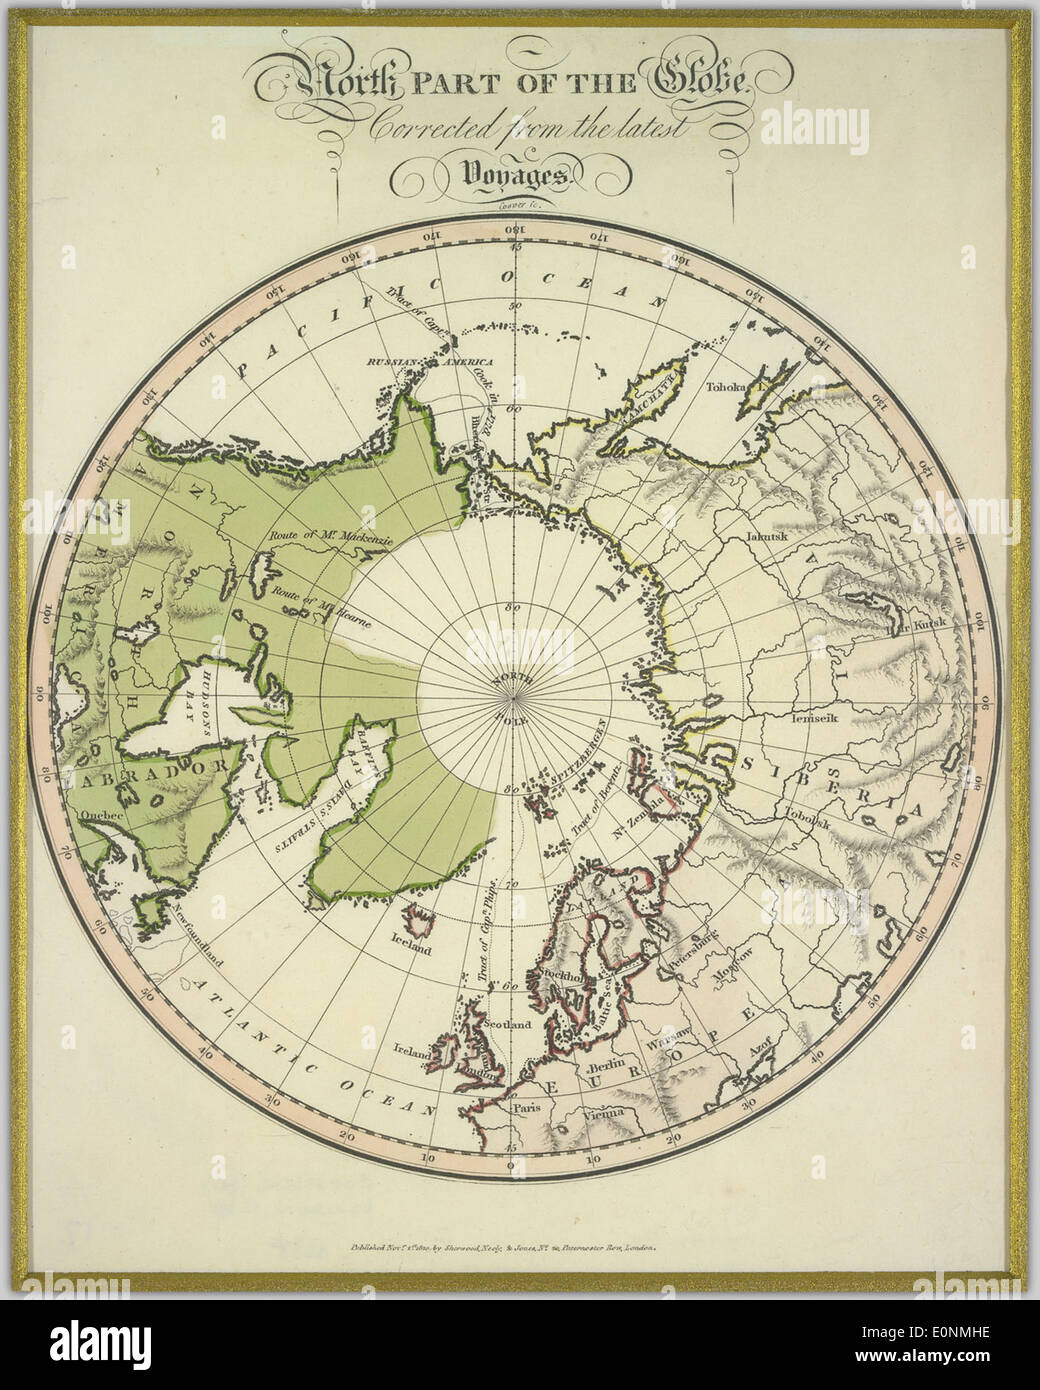 North part of the globe corrected from the latest voyages Stock Photo